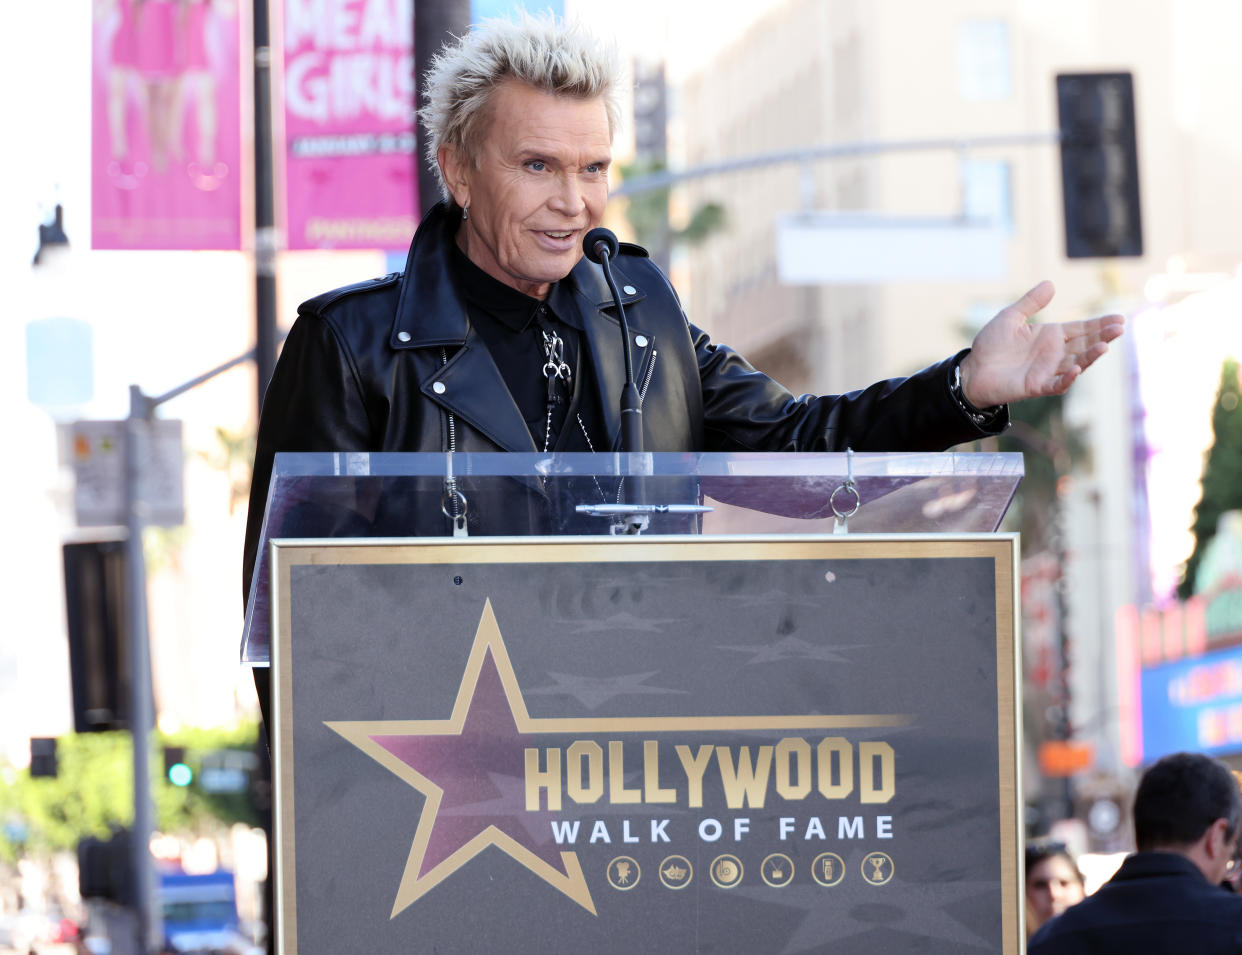 Billy Idol is honored with a Star on the Hollywood Walk of Fame on January 06, 2023 in Hollywood, California. (David Livingston / Getty Images)